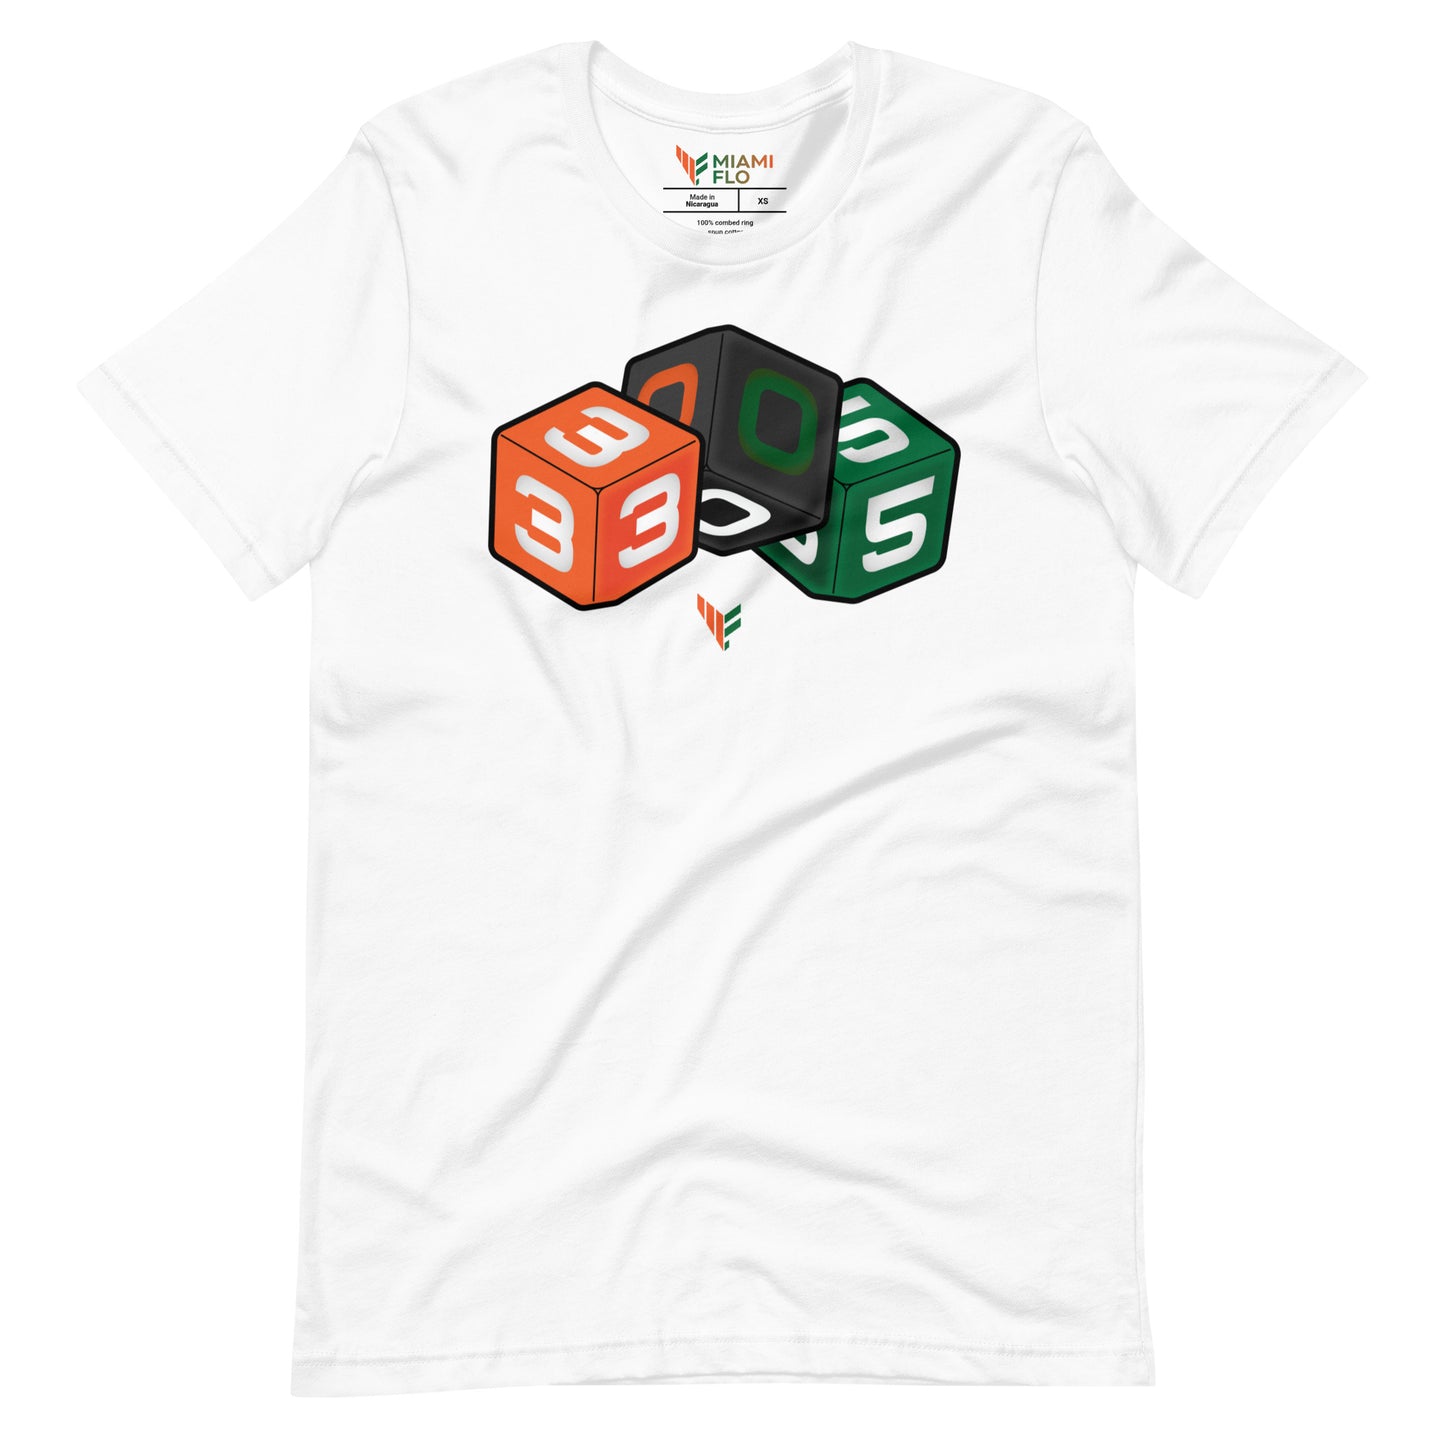 305 Dice Shirt - Designed by Jas